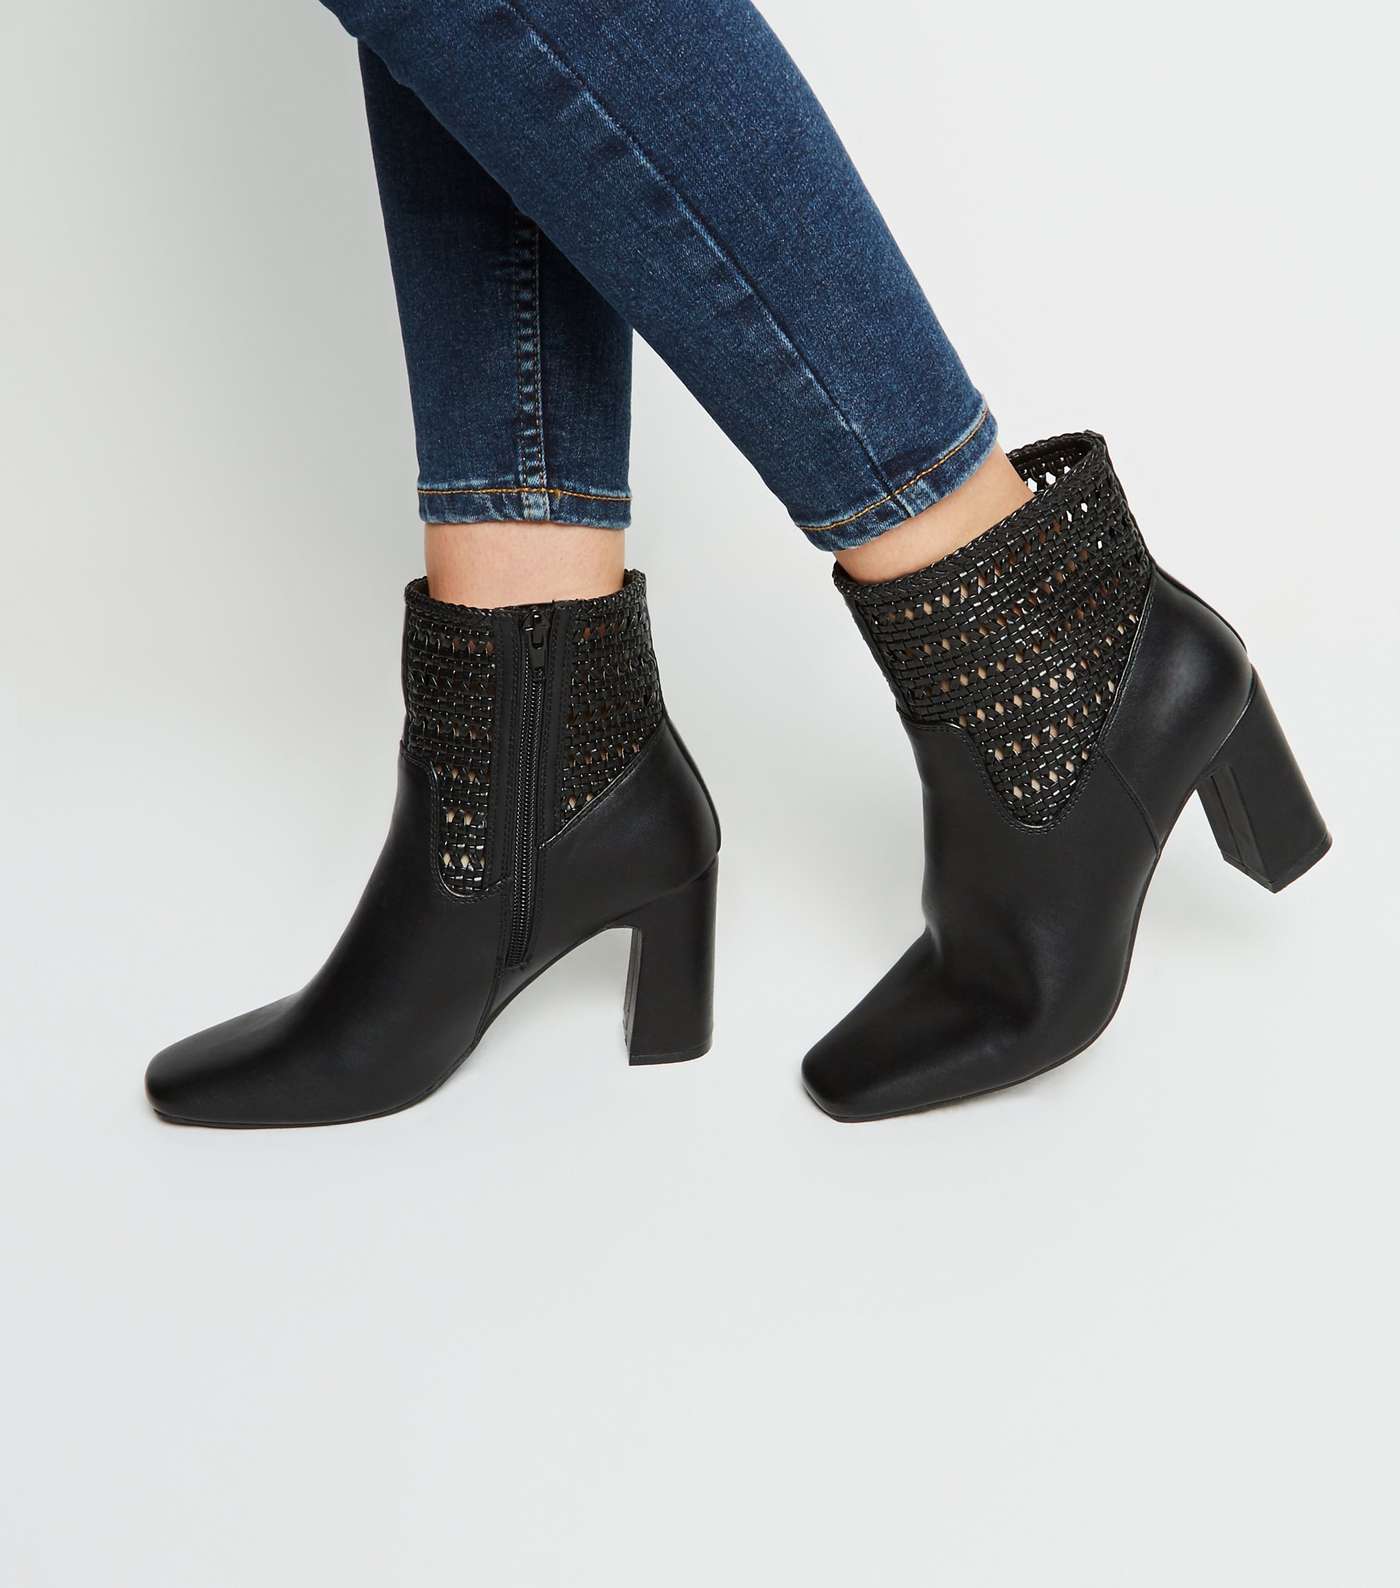 Black Leather-Look Woven Flare Heel Boots Image 2